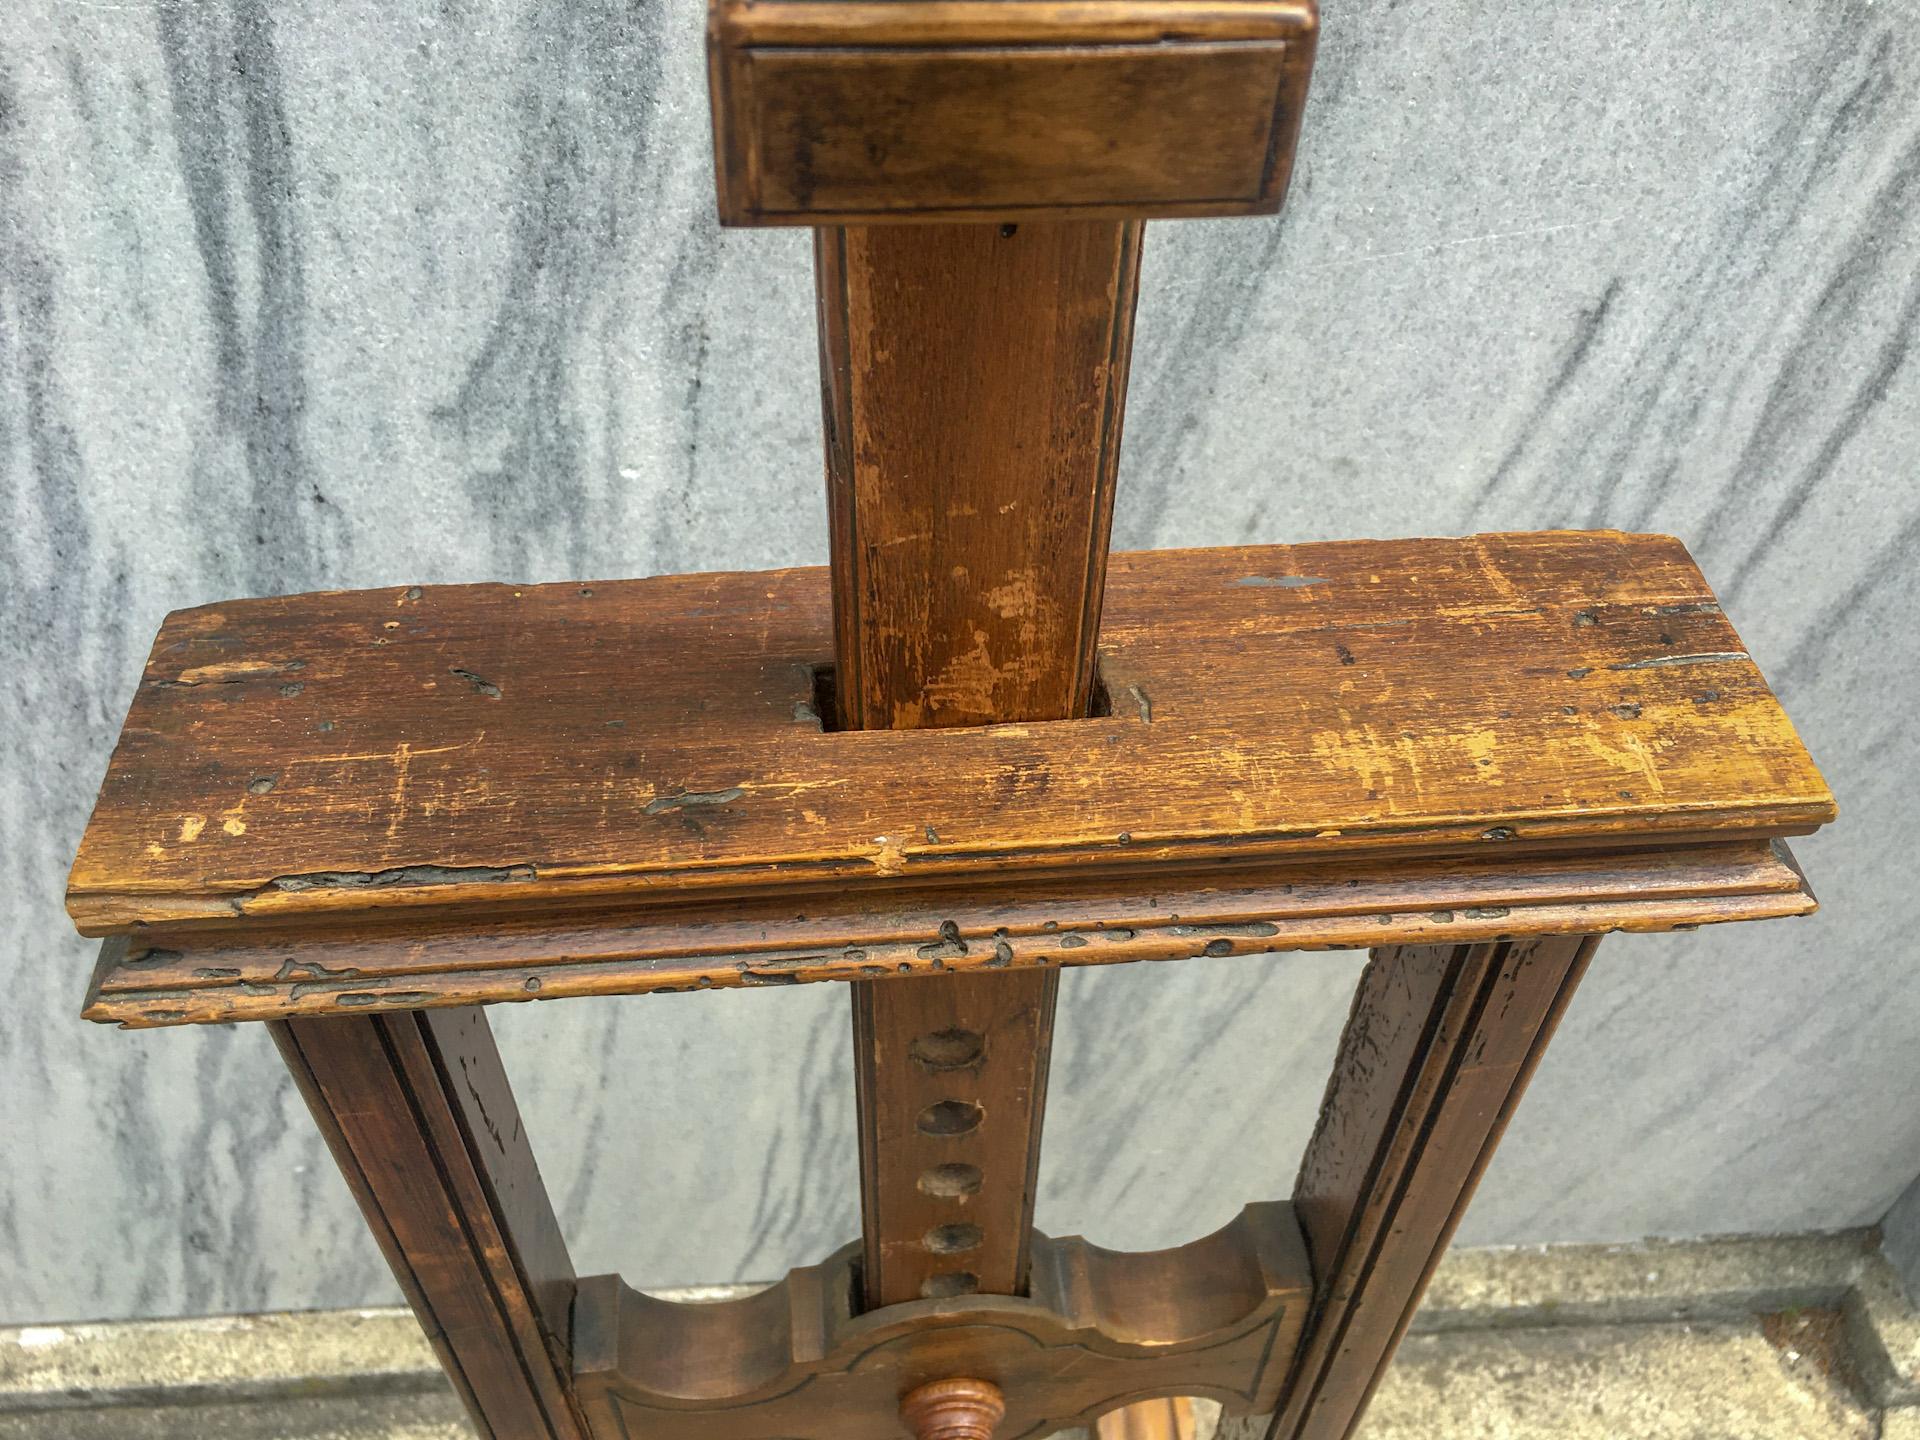 19thc. French Fruitwood Adjustable Artist's Easel with Carved Feet In Good Condition For Sale In Savannah, GA